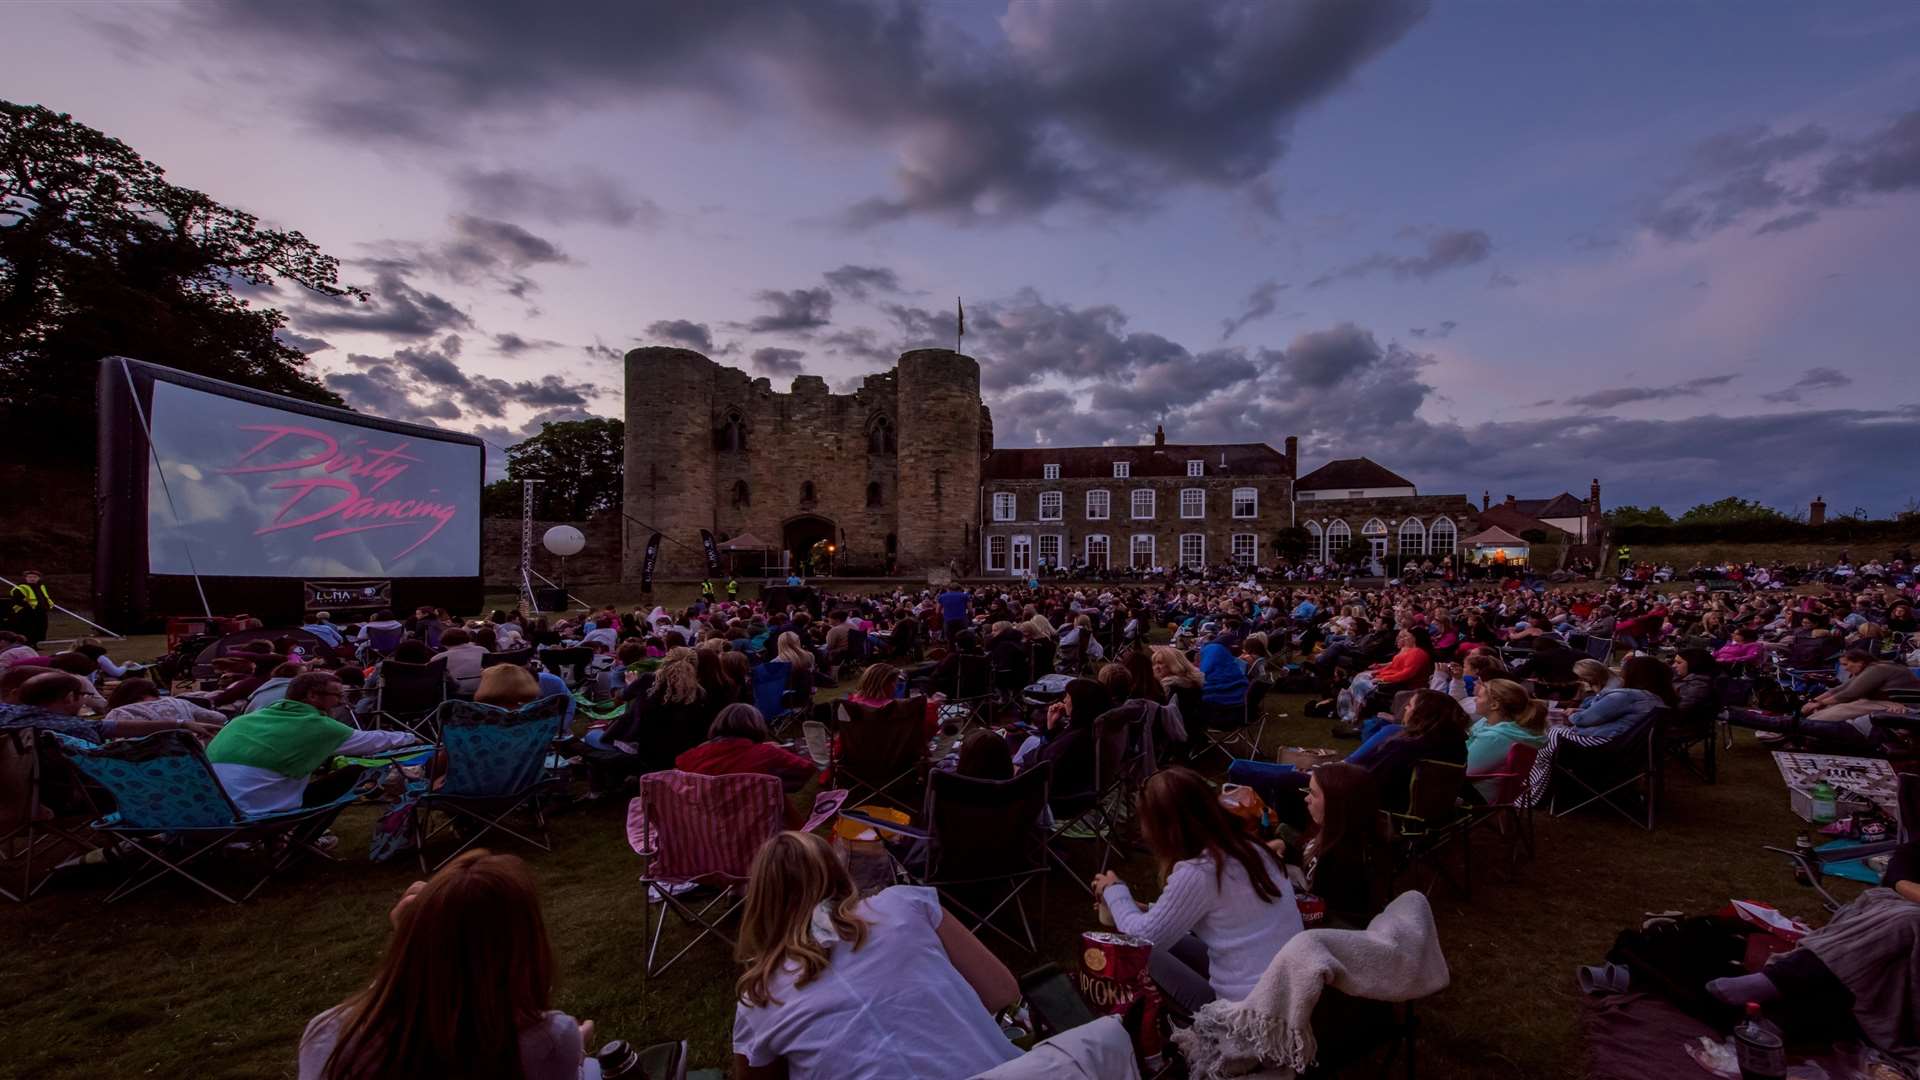 Tonbridge Castle is one of the venues for open air cinema this summer